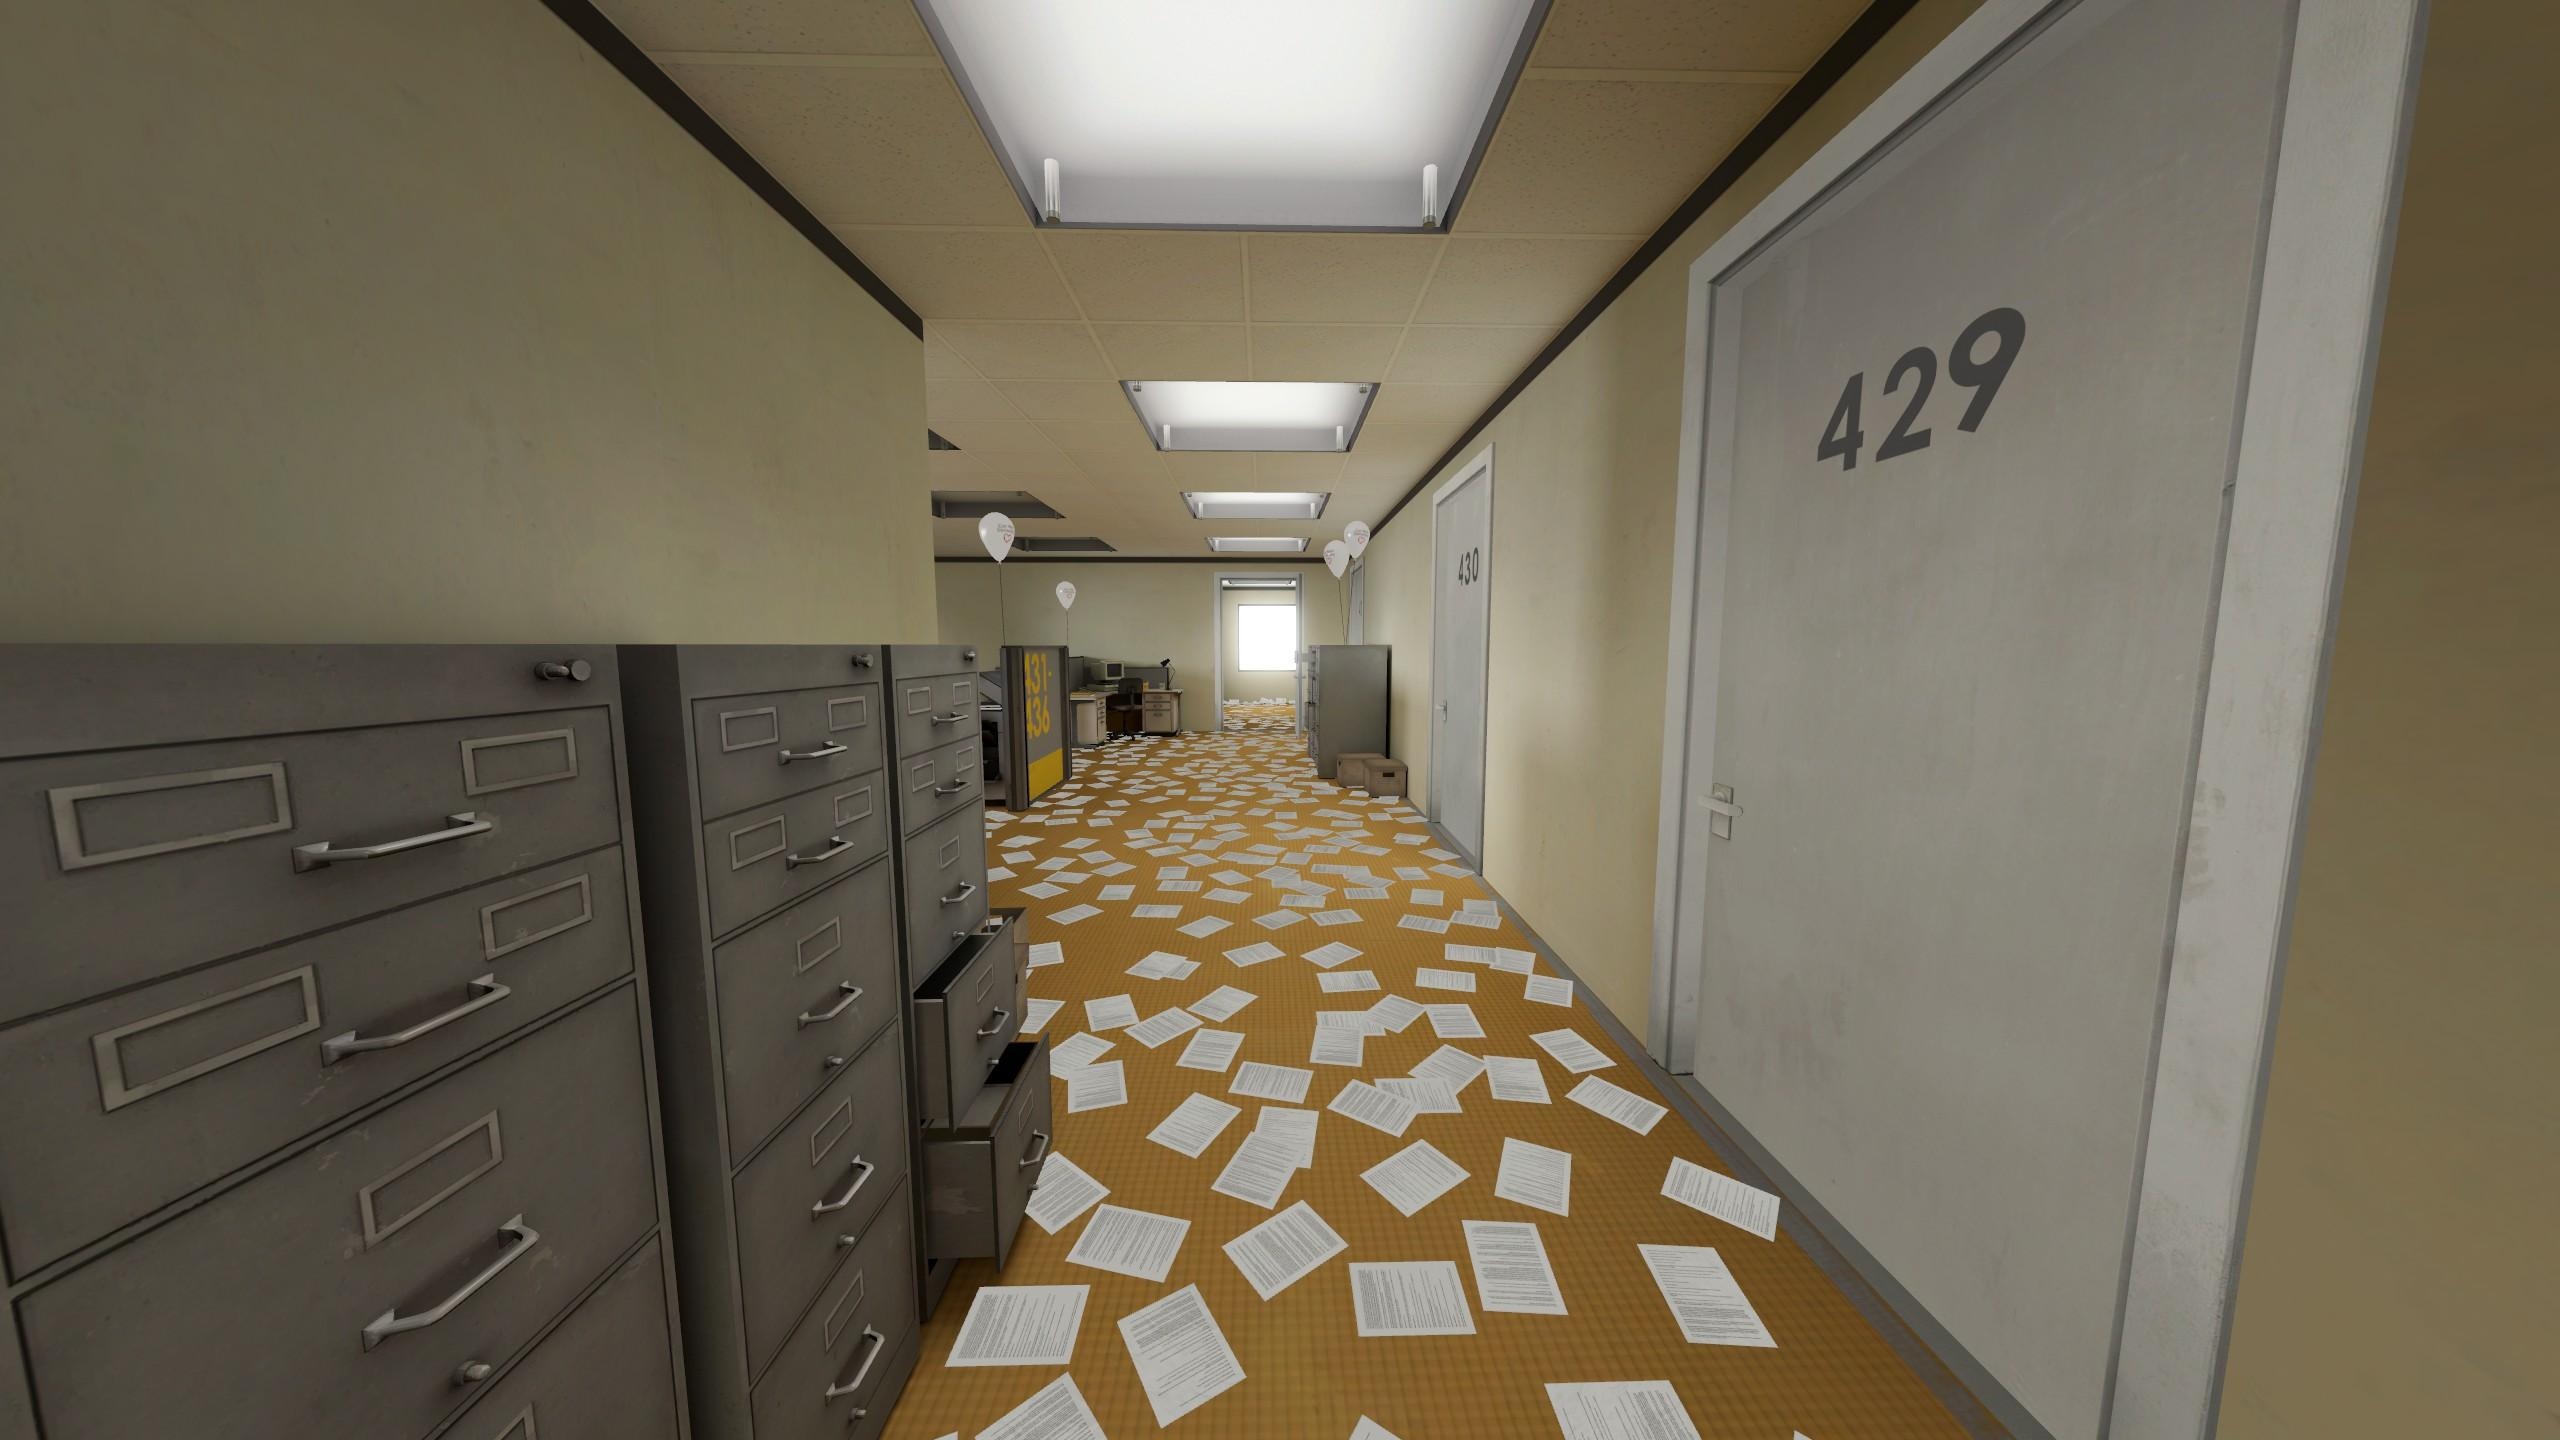 The Stanley Parable Ultra Deluxe: The player may contradict the narrator's directions. 2560x1440 HD Wallpaper.